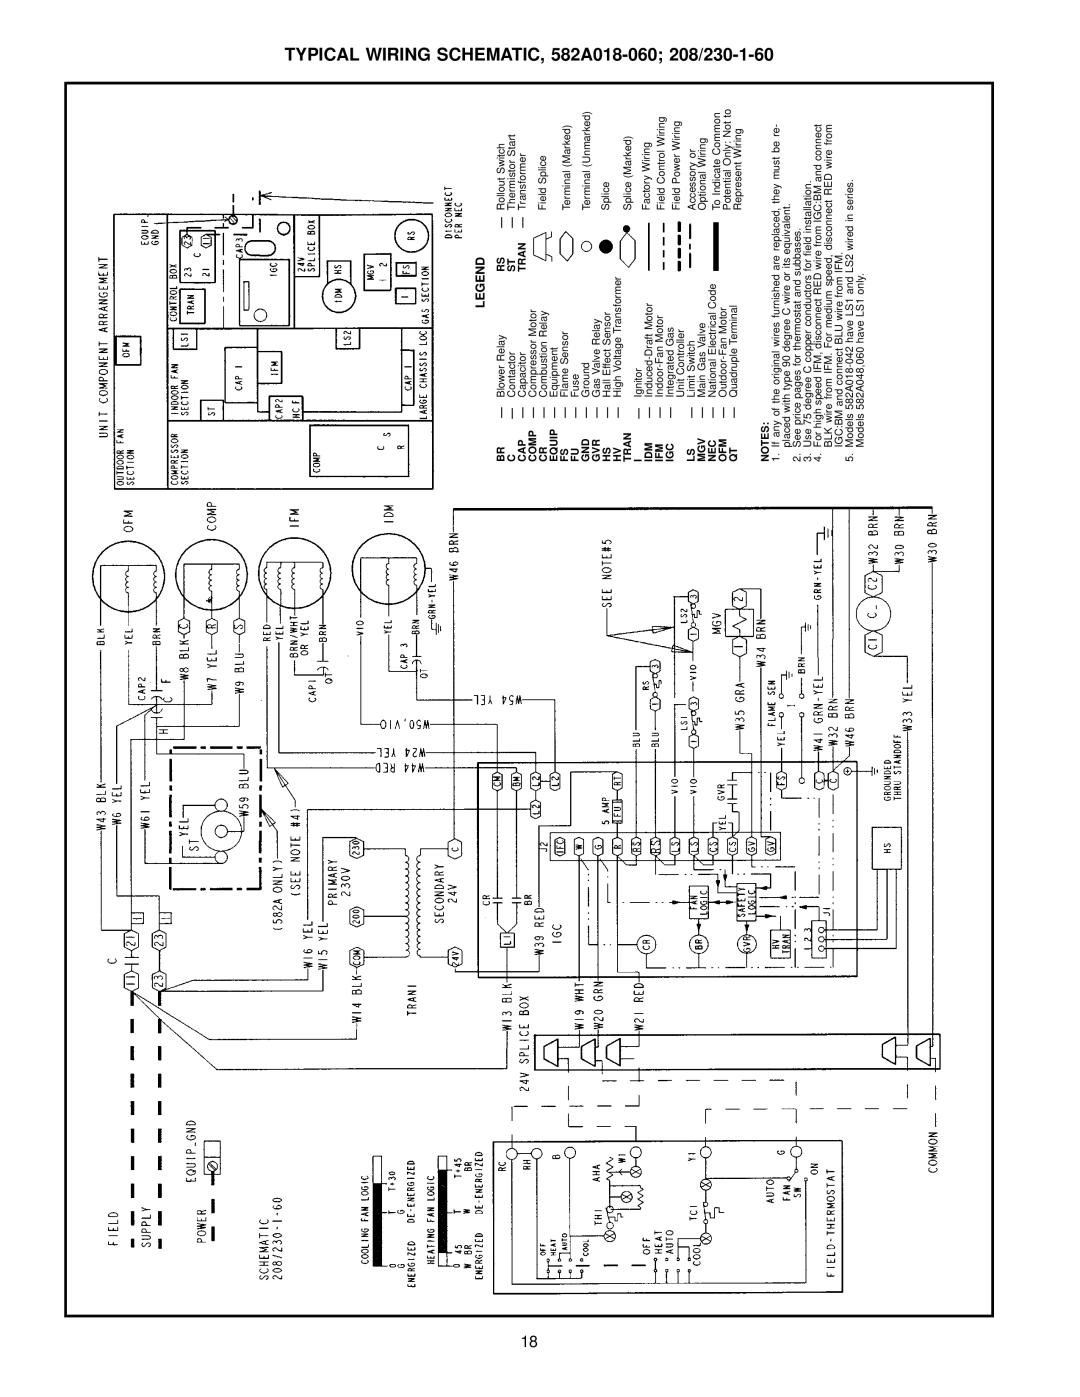 Bryant manual 582A018-060 208/230-1, Typical Wiring Schematic 